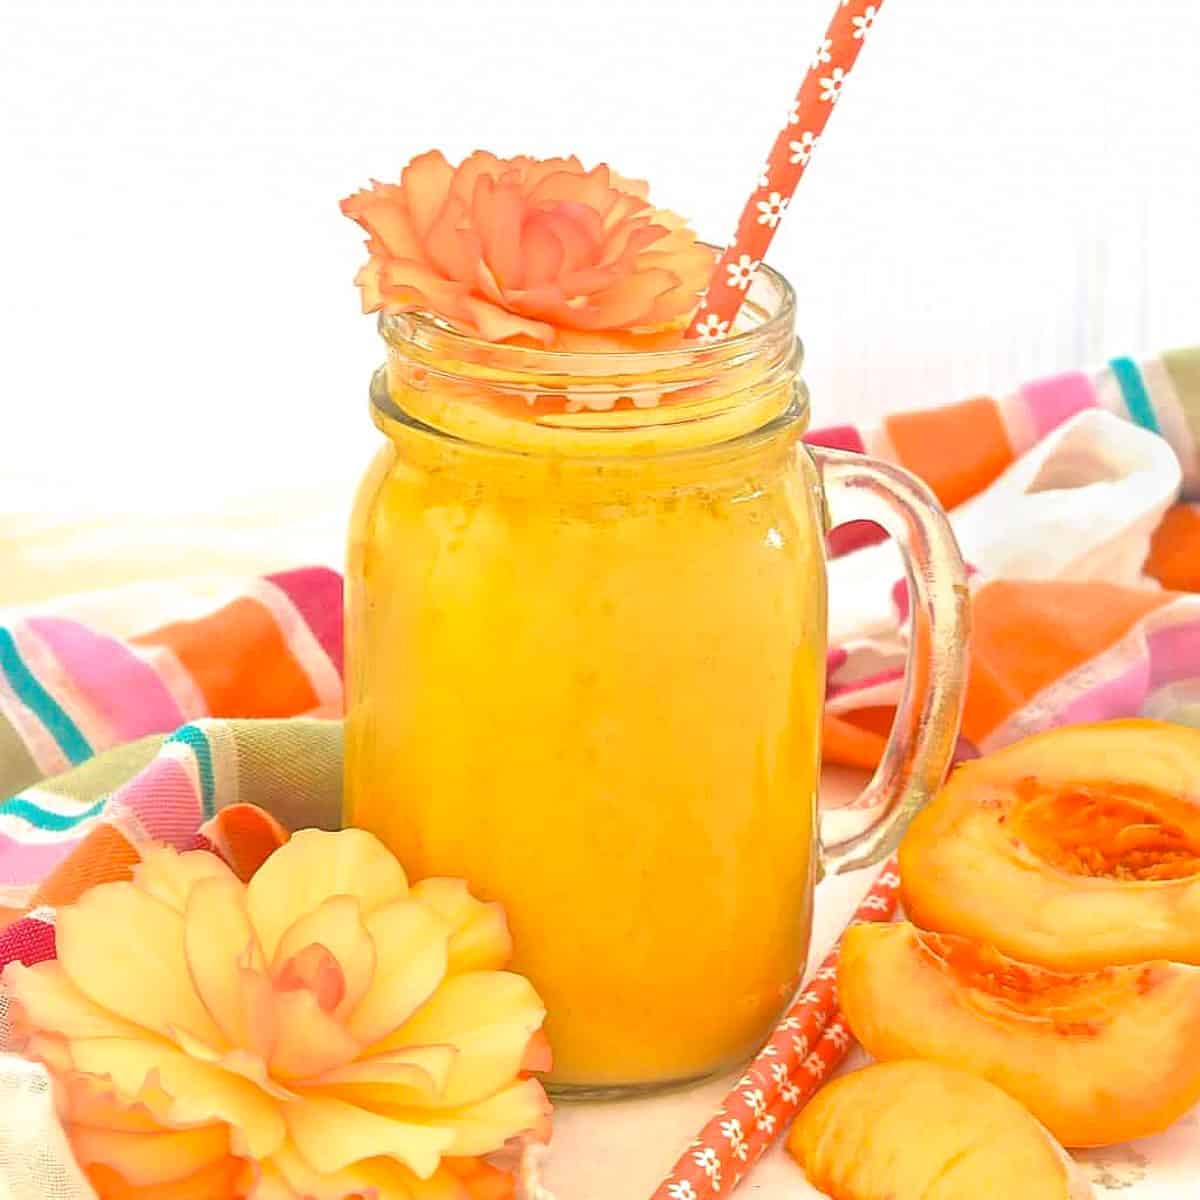 peach smoothie with orange flowers for decoration